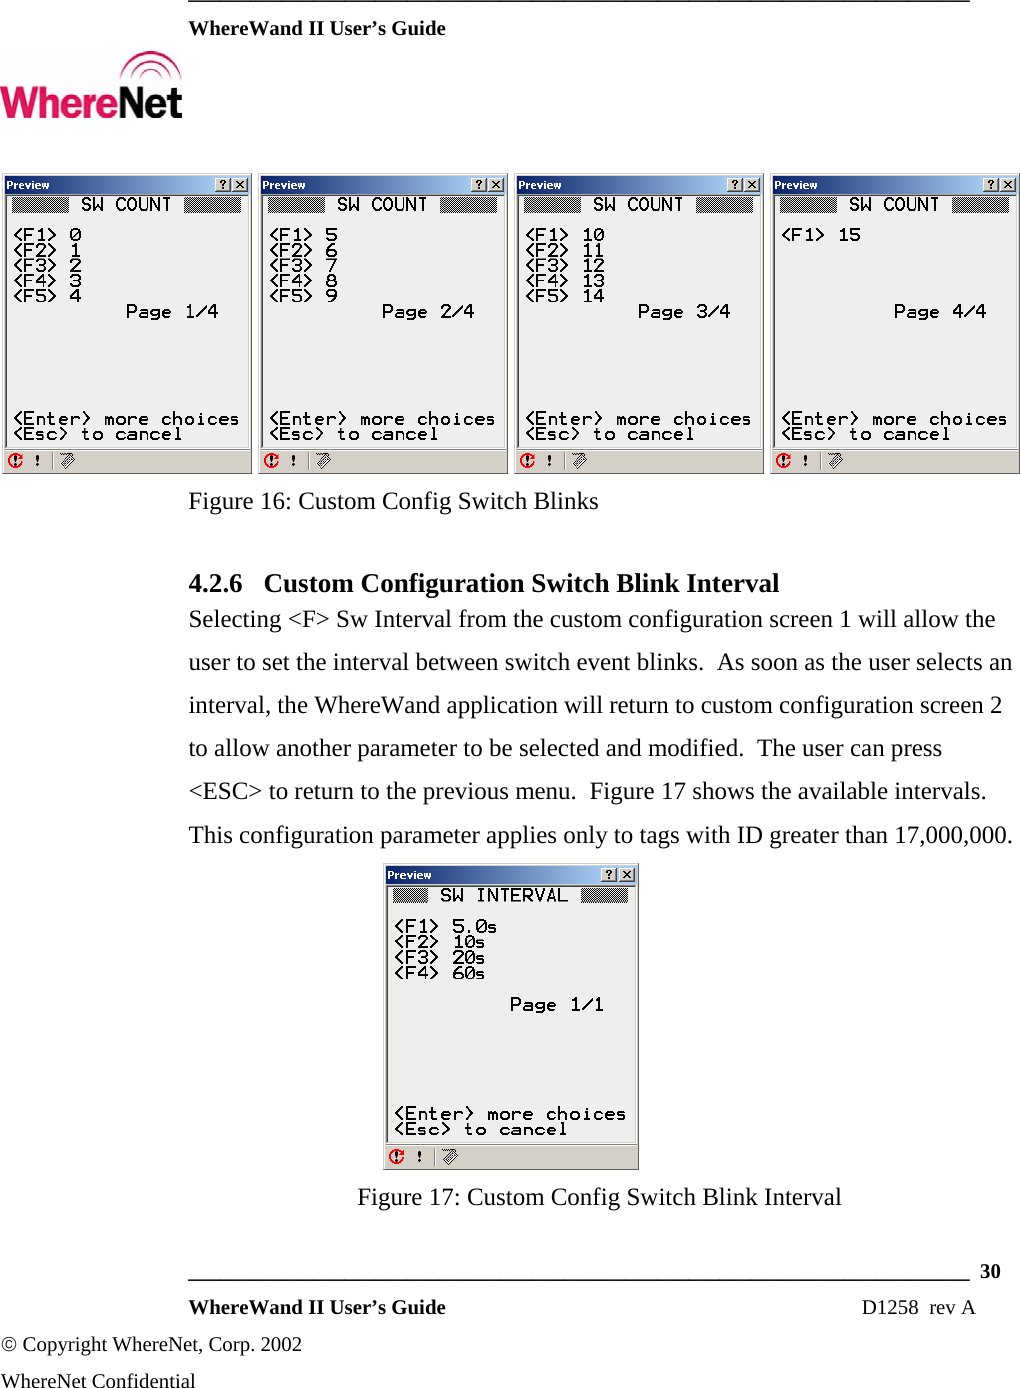  ___________________________________________________________________________  WhereWand II User’s Guide     ___________________________________________________________________________  30  WhereWand II User’s Guide                                                                          D1258  rev A © Copyright WhereNet, Corp. 2002  WhereNet Confidential     Figure 16: Custom Config Switch Blinks 4.2.6 Custom Configuration Switch Blink Interval Selecting &lt;F&gt; Sw Interval from the custom configuration screen 1 will allow the user to set the interval between switch event blinks.  As soon as the user selects an interval, the WhereWand application will return to custom configuration screen 2 to allow another parameter to be selected and modified.  The user can press &lt;ESC&gt; to return to the previous menu.  Figure 17 shows the available intervals. This configuration parameter applies only to tags with ID greater than 17,000,000.  Figure 17: Custom Config Switch Blink Interval 